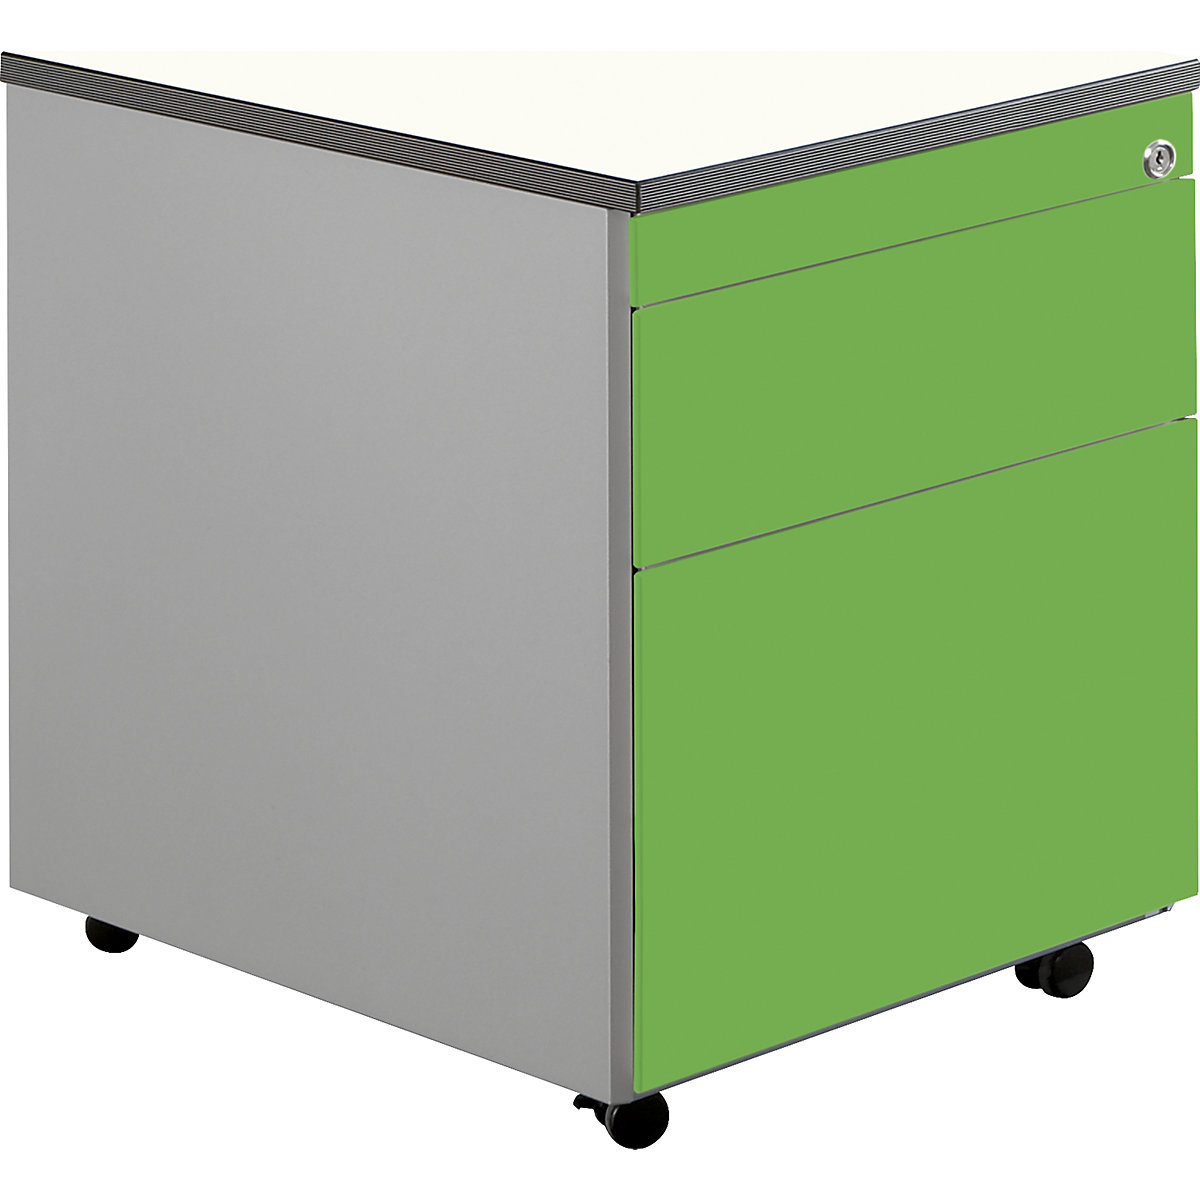 Drawer pedestal with castors – mauser, HxD 579 x 600 mm, 1 drawer, 1 suspension file drawer, white aluminium / yellow green / white-4